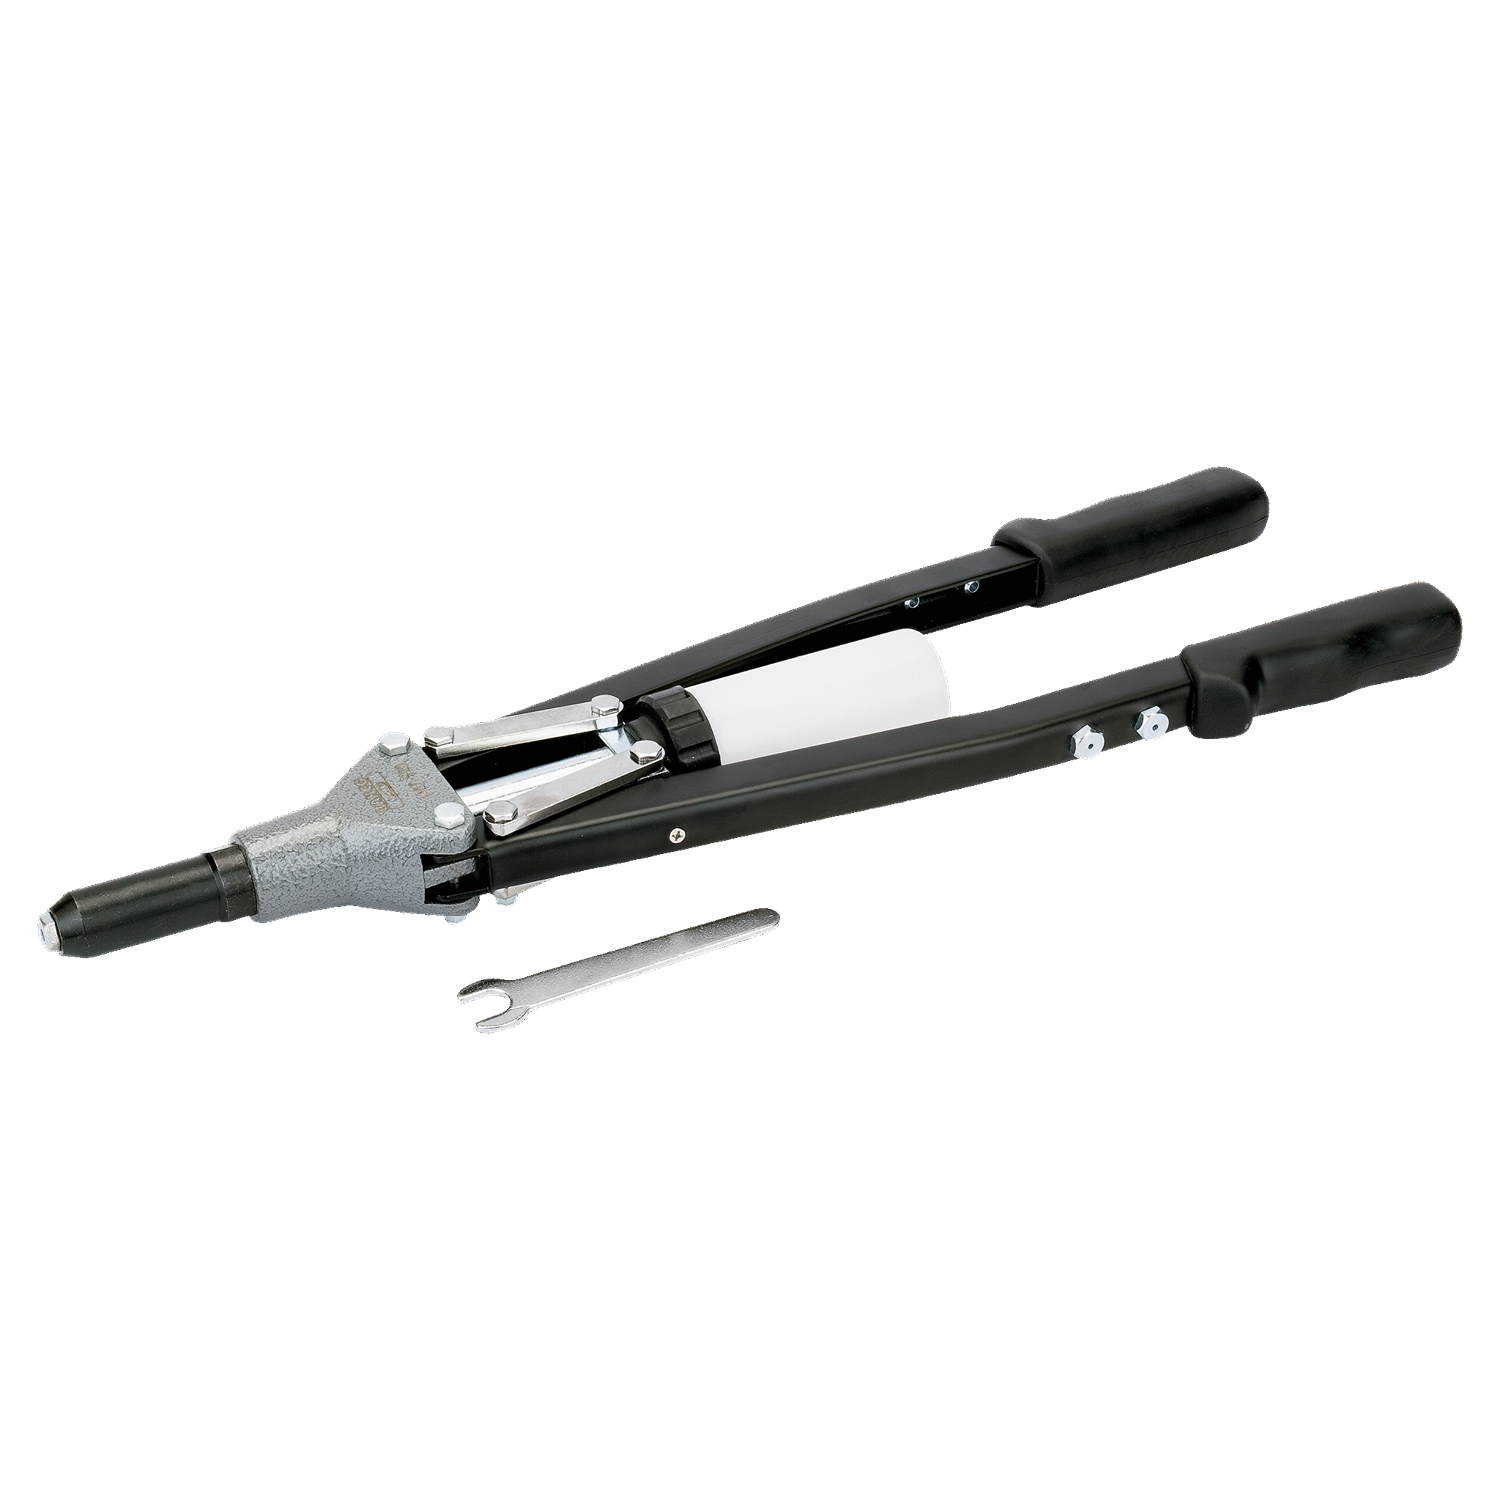 BAHCO 1467-520 Long Arm Riveting Tools with Transparent Tube - Premium Riveting Tools from BAHCO - Shop now at Yew Aik.